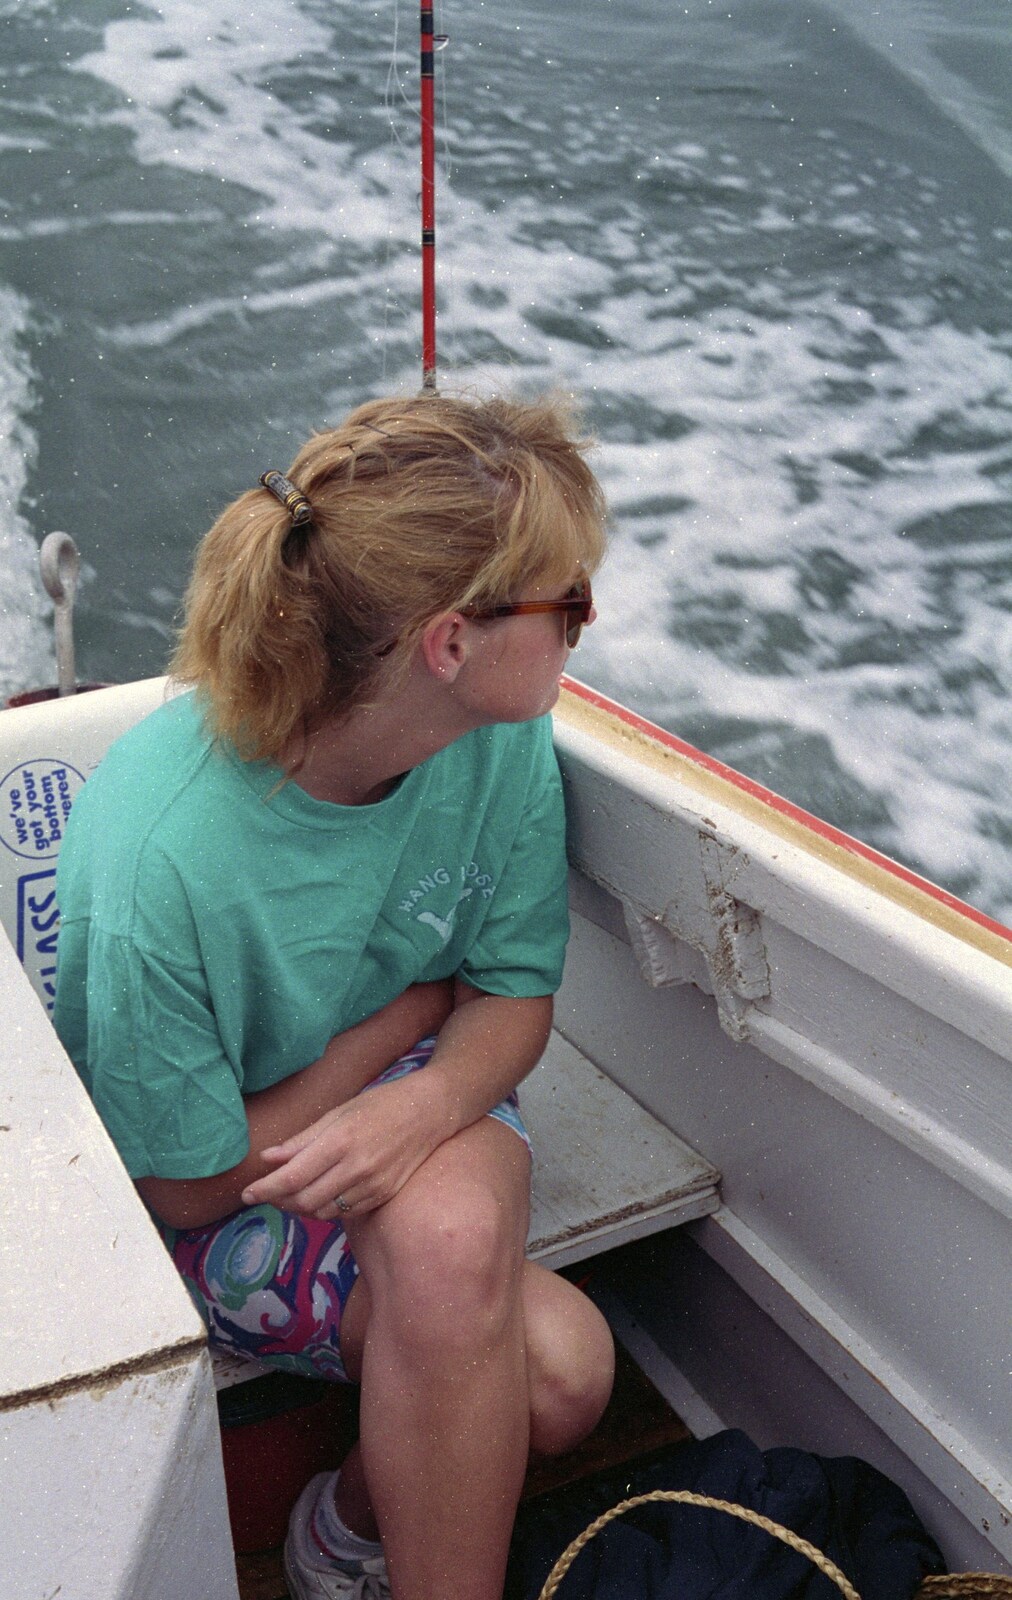 Suzanne looks out to sea from Ferry Landing, Whitianga, New Zealand - 23rd November 1992